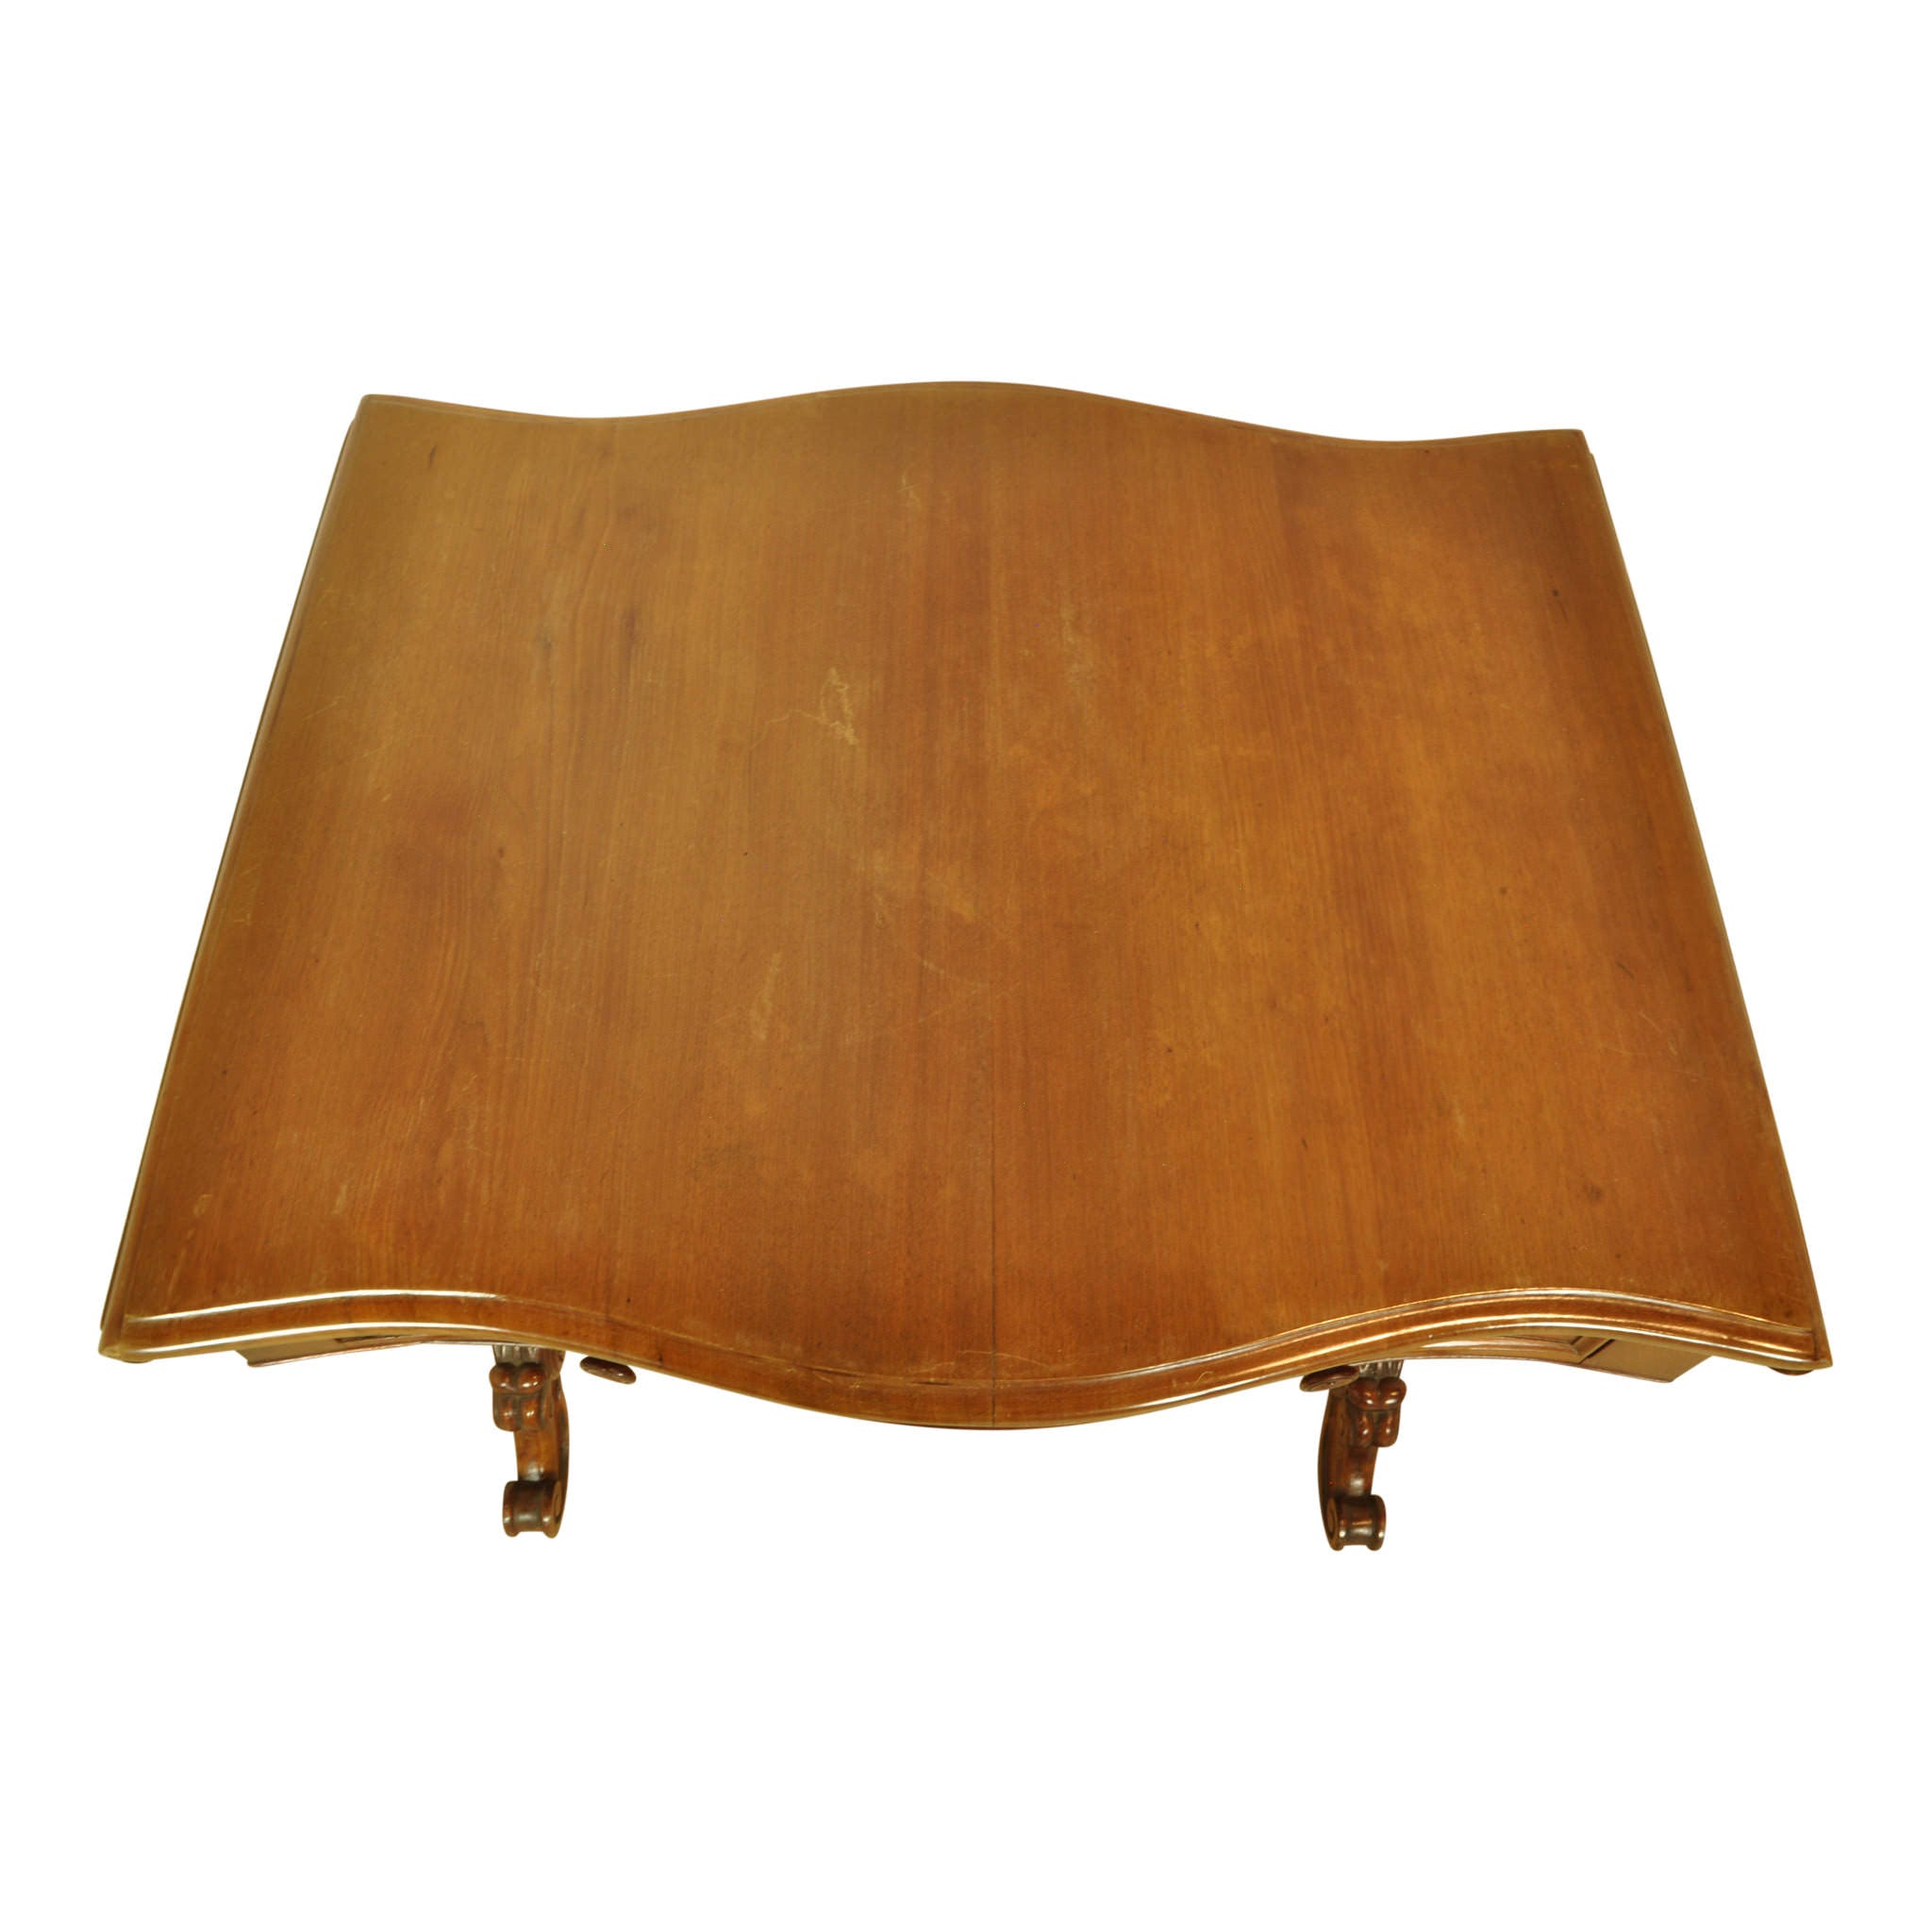 Mahogany Pembroke Table with Drop Leaf Sides